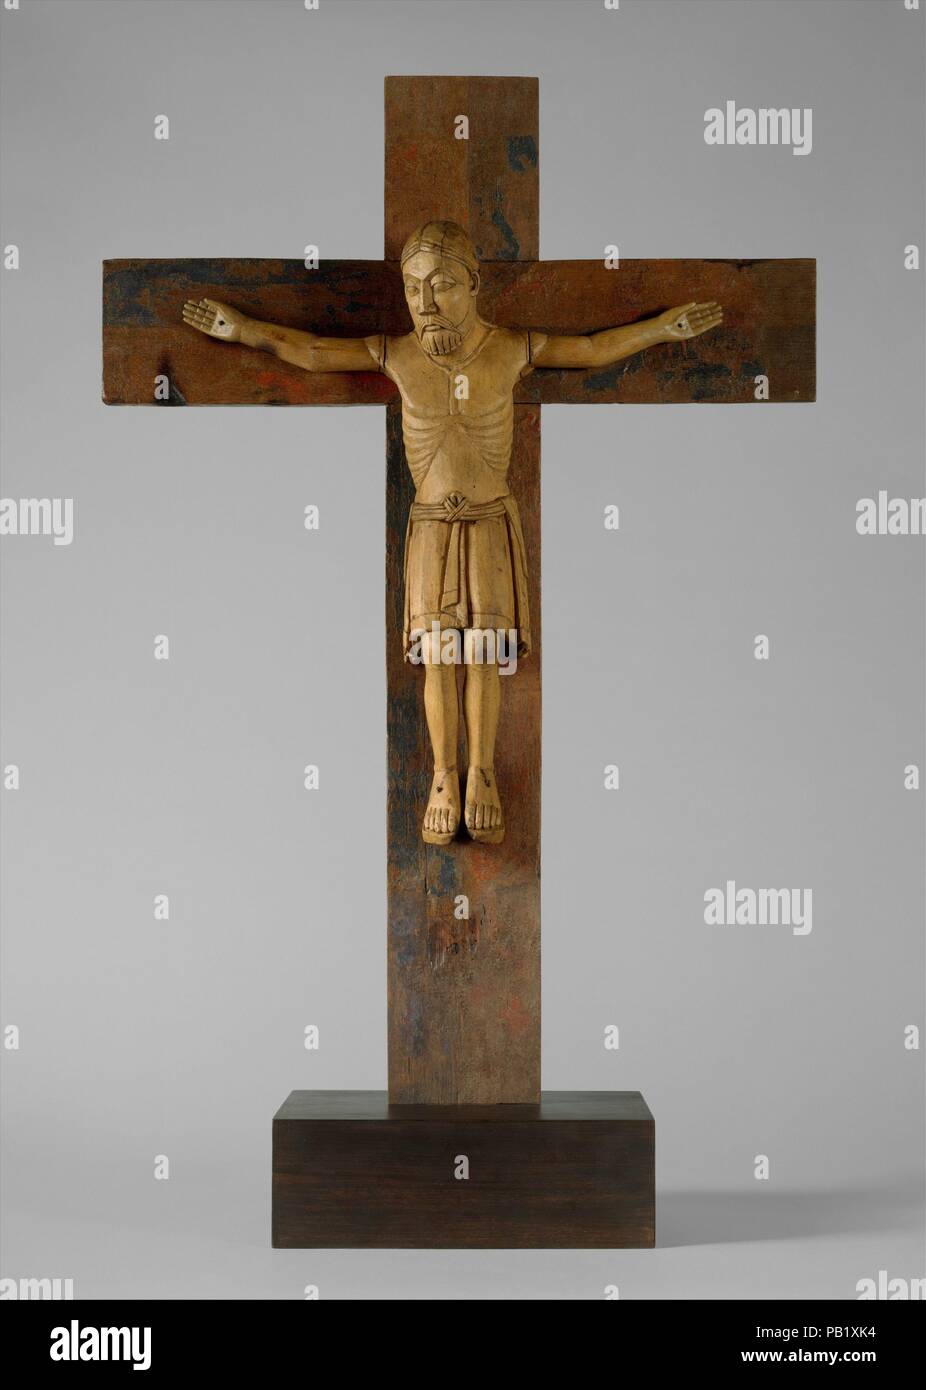 Crucifix. Culture: Austrian. Dimensions: Overall (Cross with base): 37 3/8  x 23 1/4 x 9 in. (95 x 59 x 22.9 cm) Cross and Corpus without base: 33 7/16  x 23 1/4